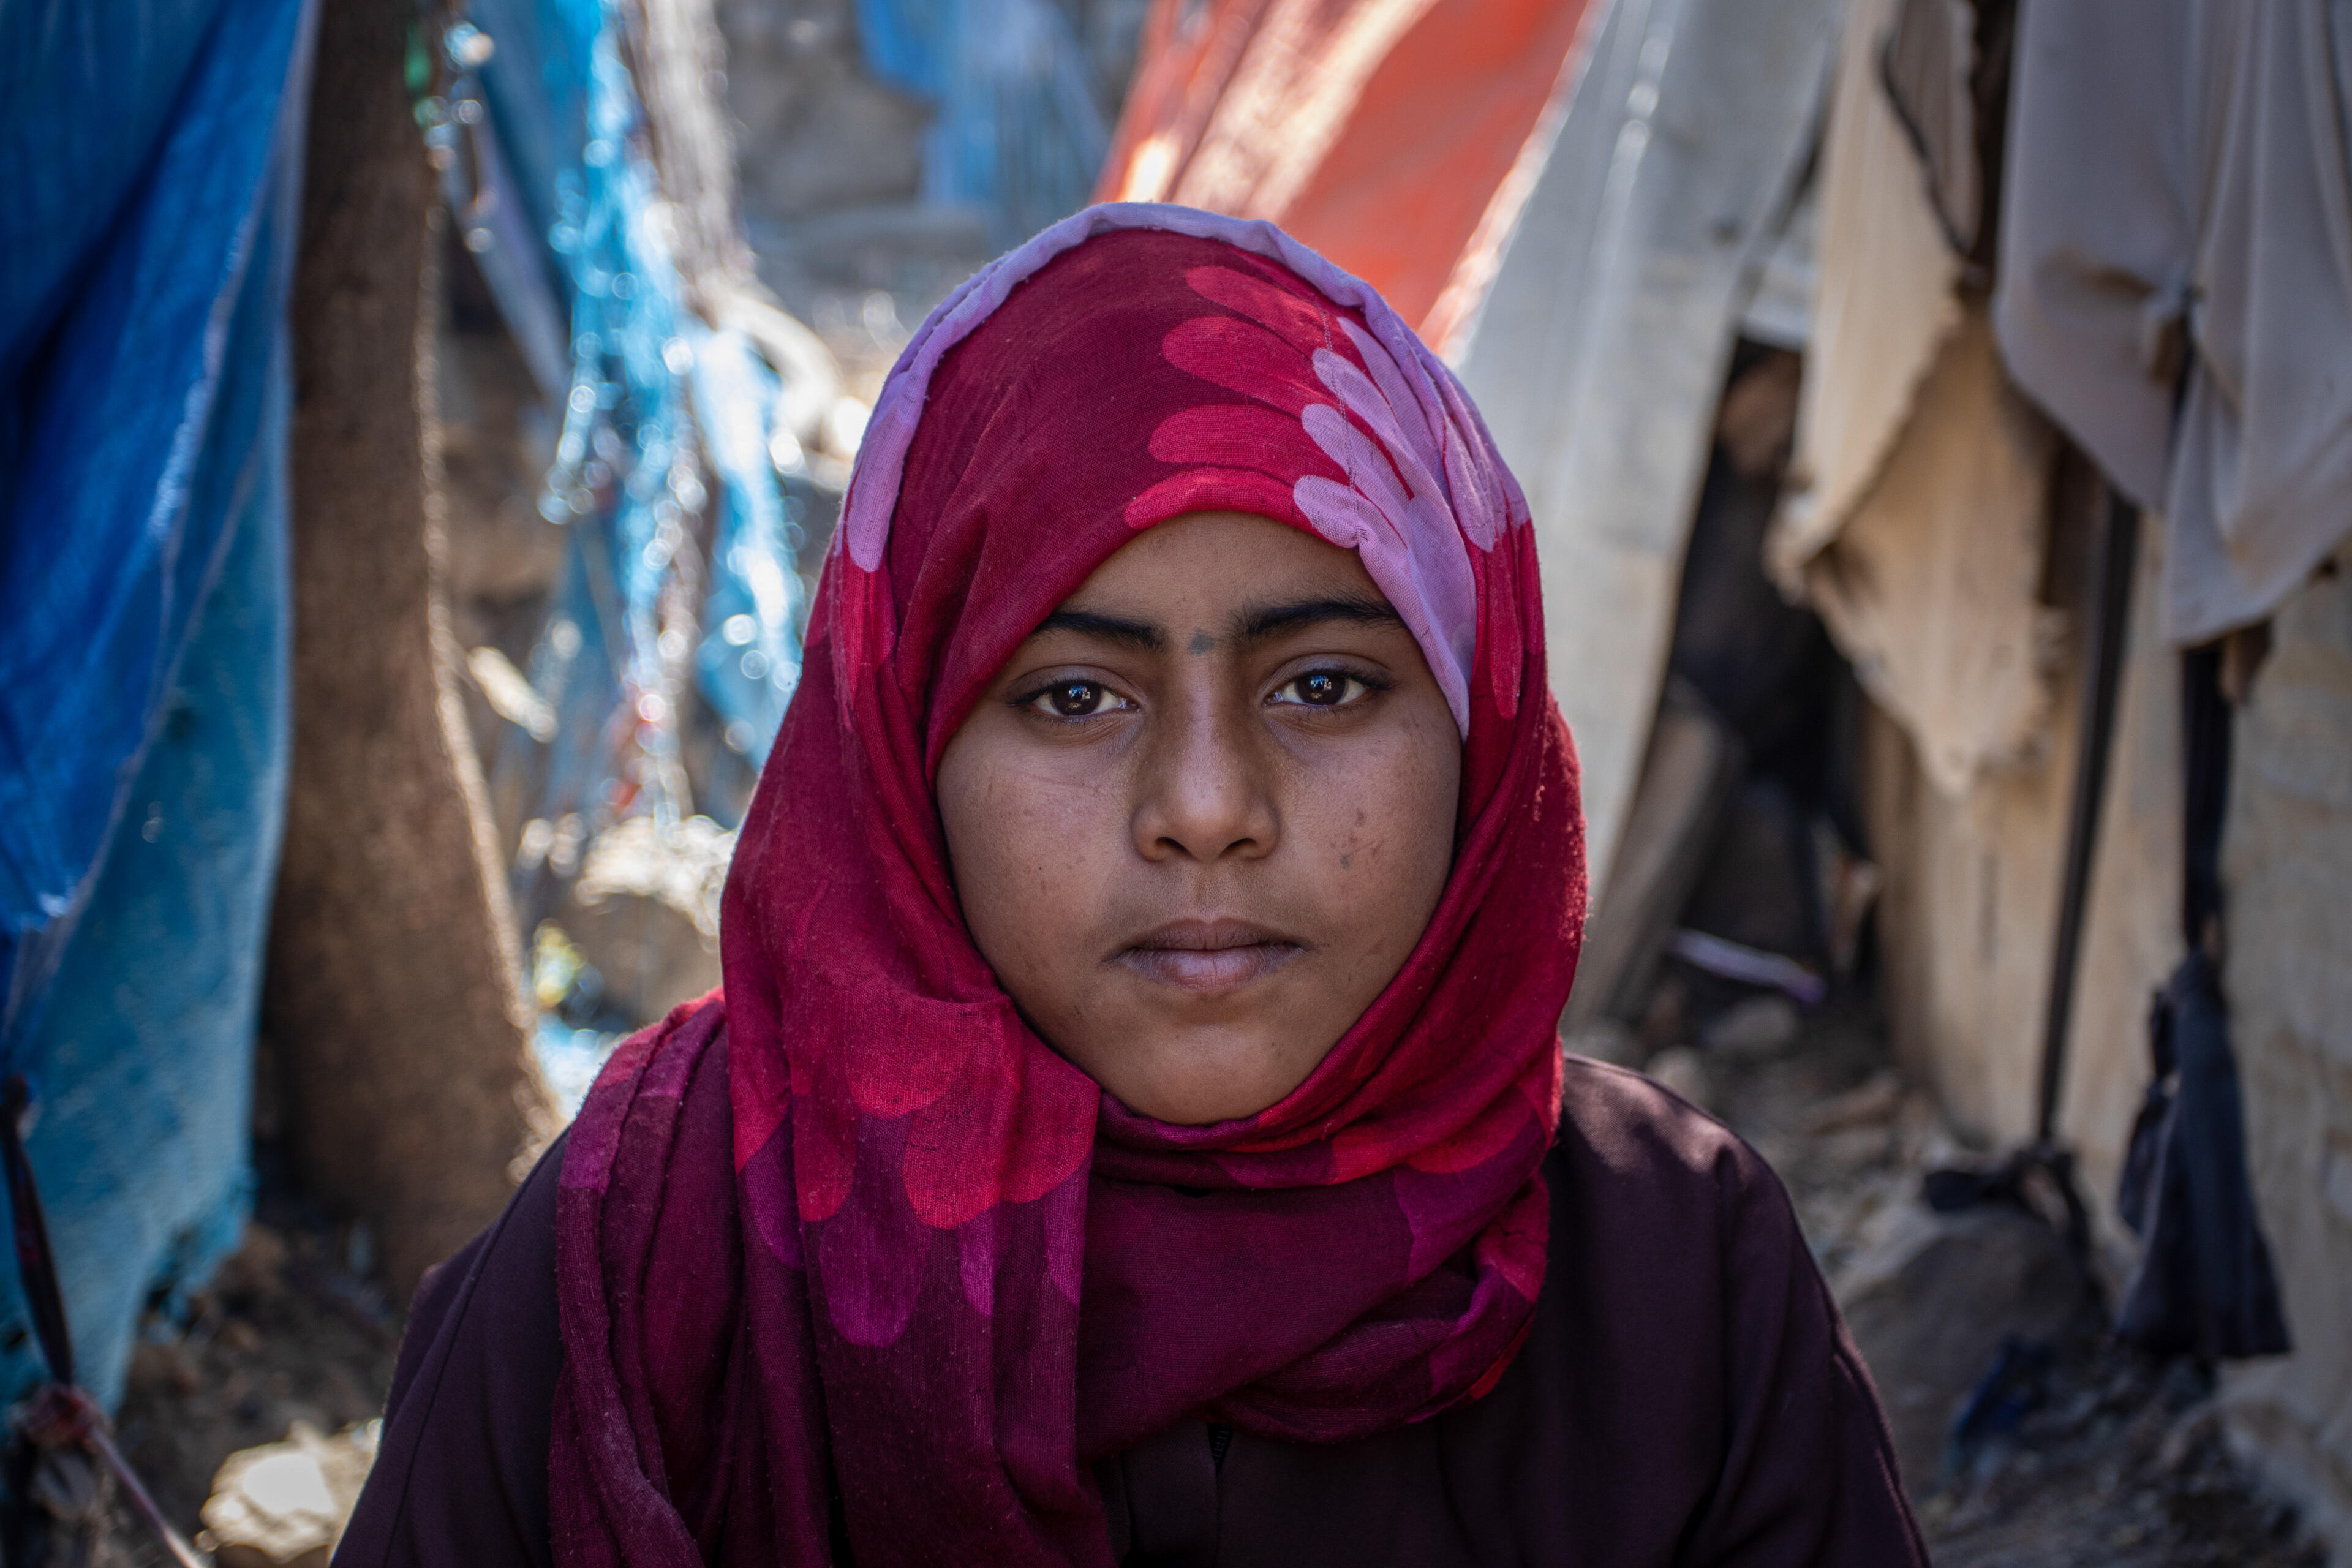 A displaced 11-year-old Yemeni girl named Na'aem stands amid makeshift tents looking directly at the camera with a serious expression.